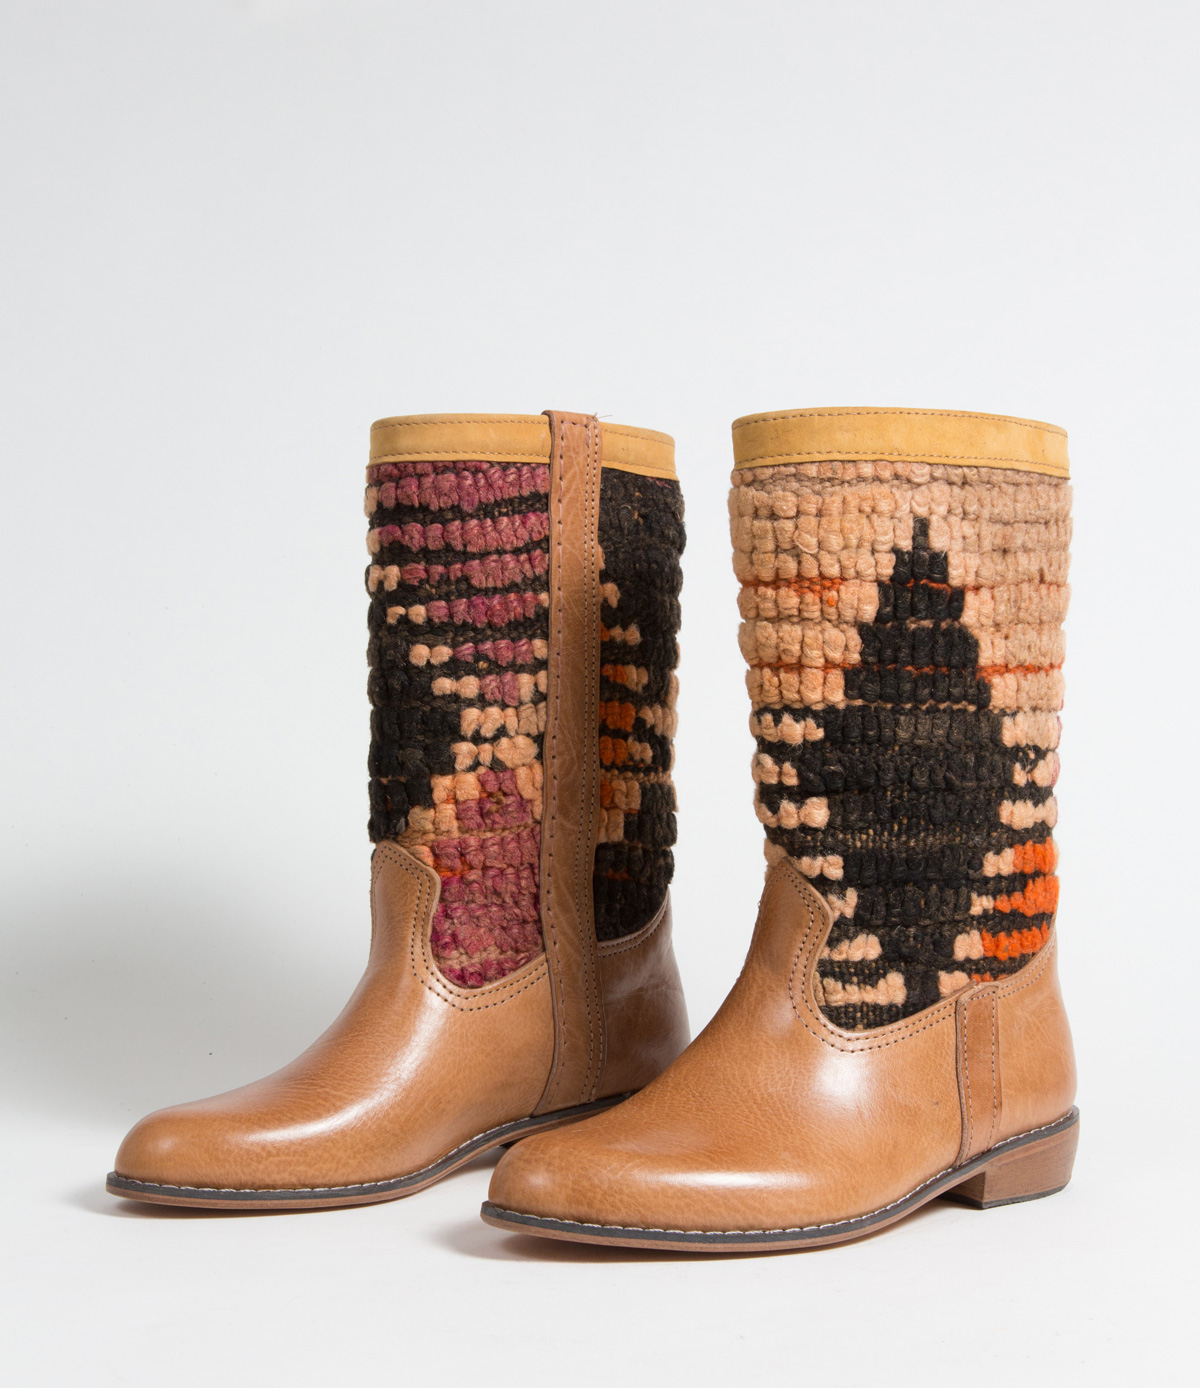 Bottes Kilim cuir mababouche artisanales (Réf. GL2-38)